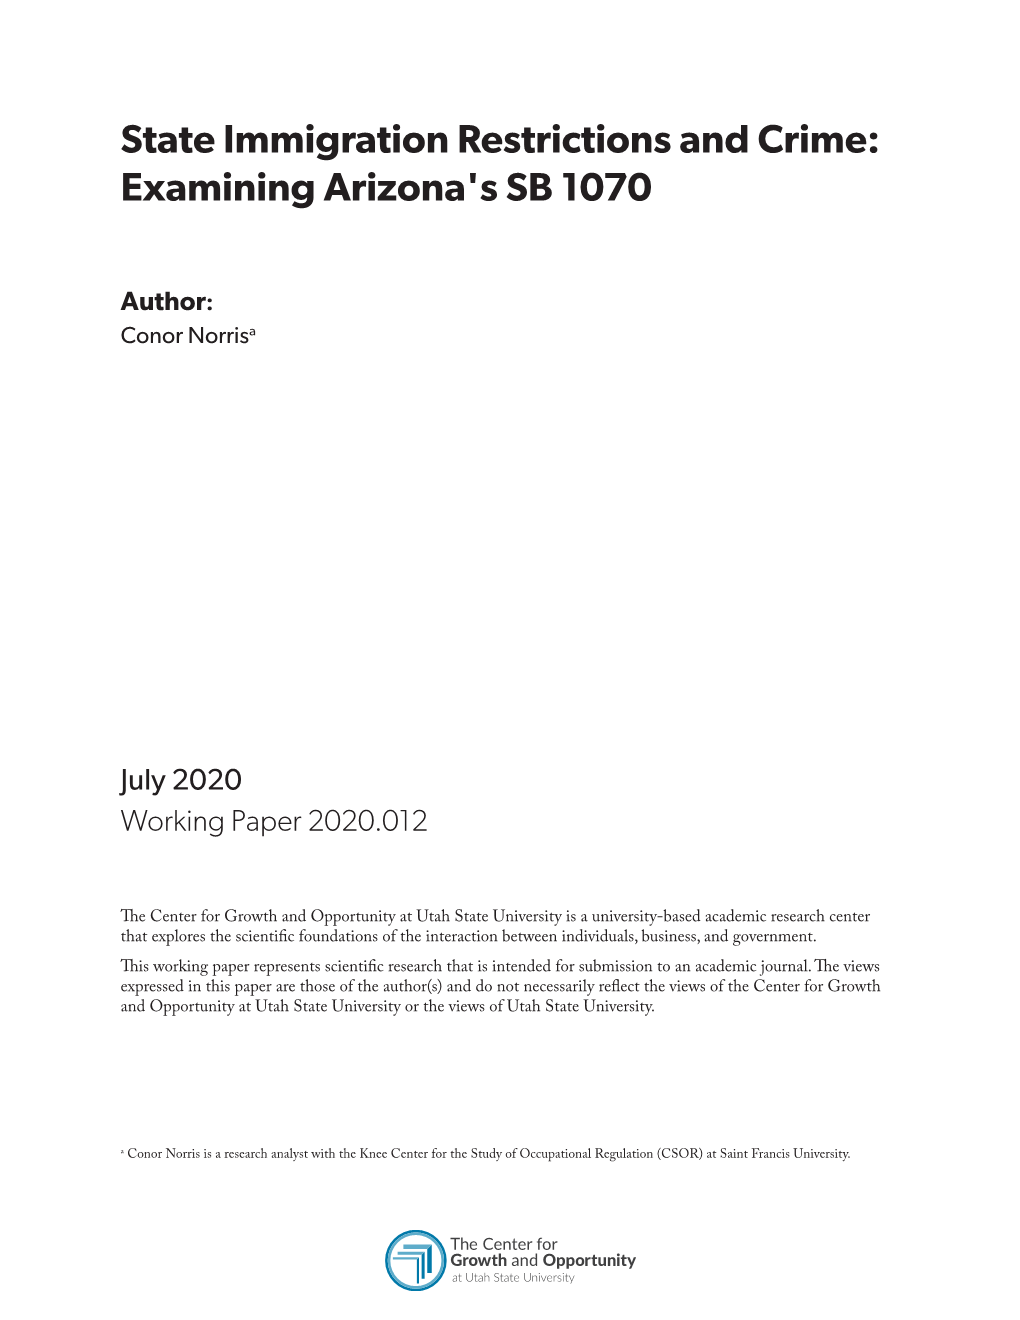 State Immigration Resrtictions and Crime: Examining Arizonia's SB 1070